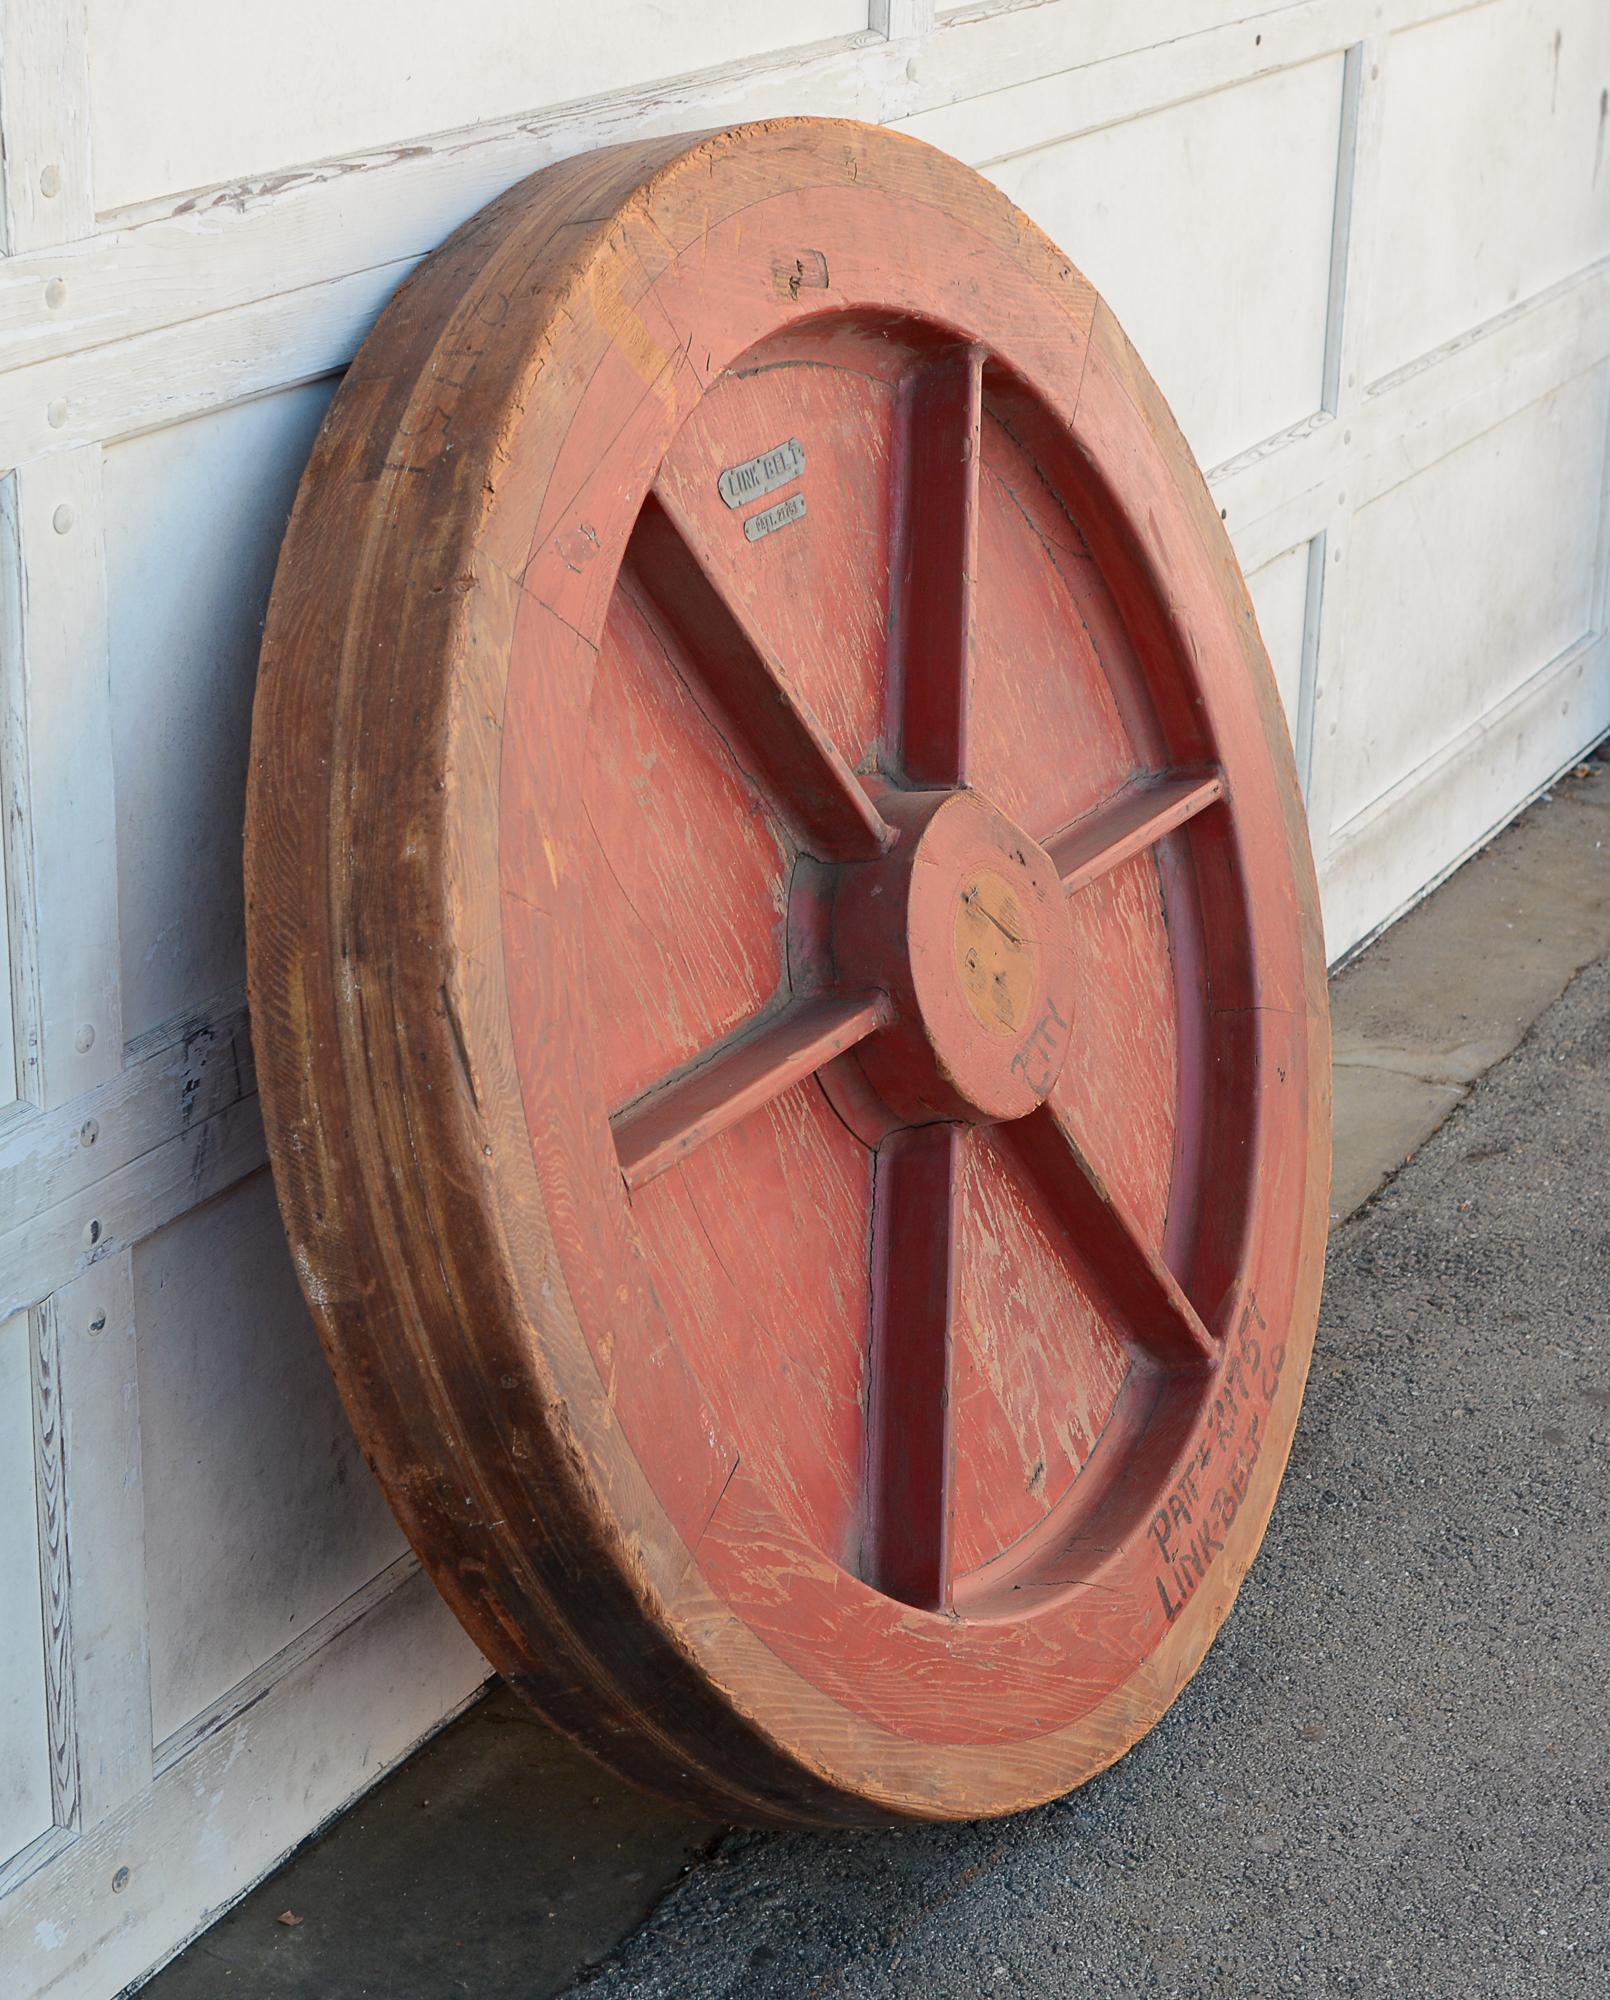 Large wheel form foundry pattern made by Linkbelt. This has wear to the paint and the wood. The back side spokes are missing.